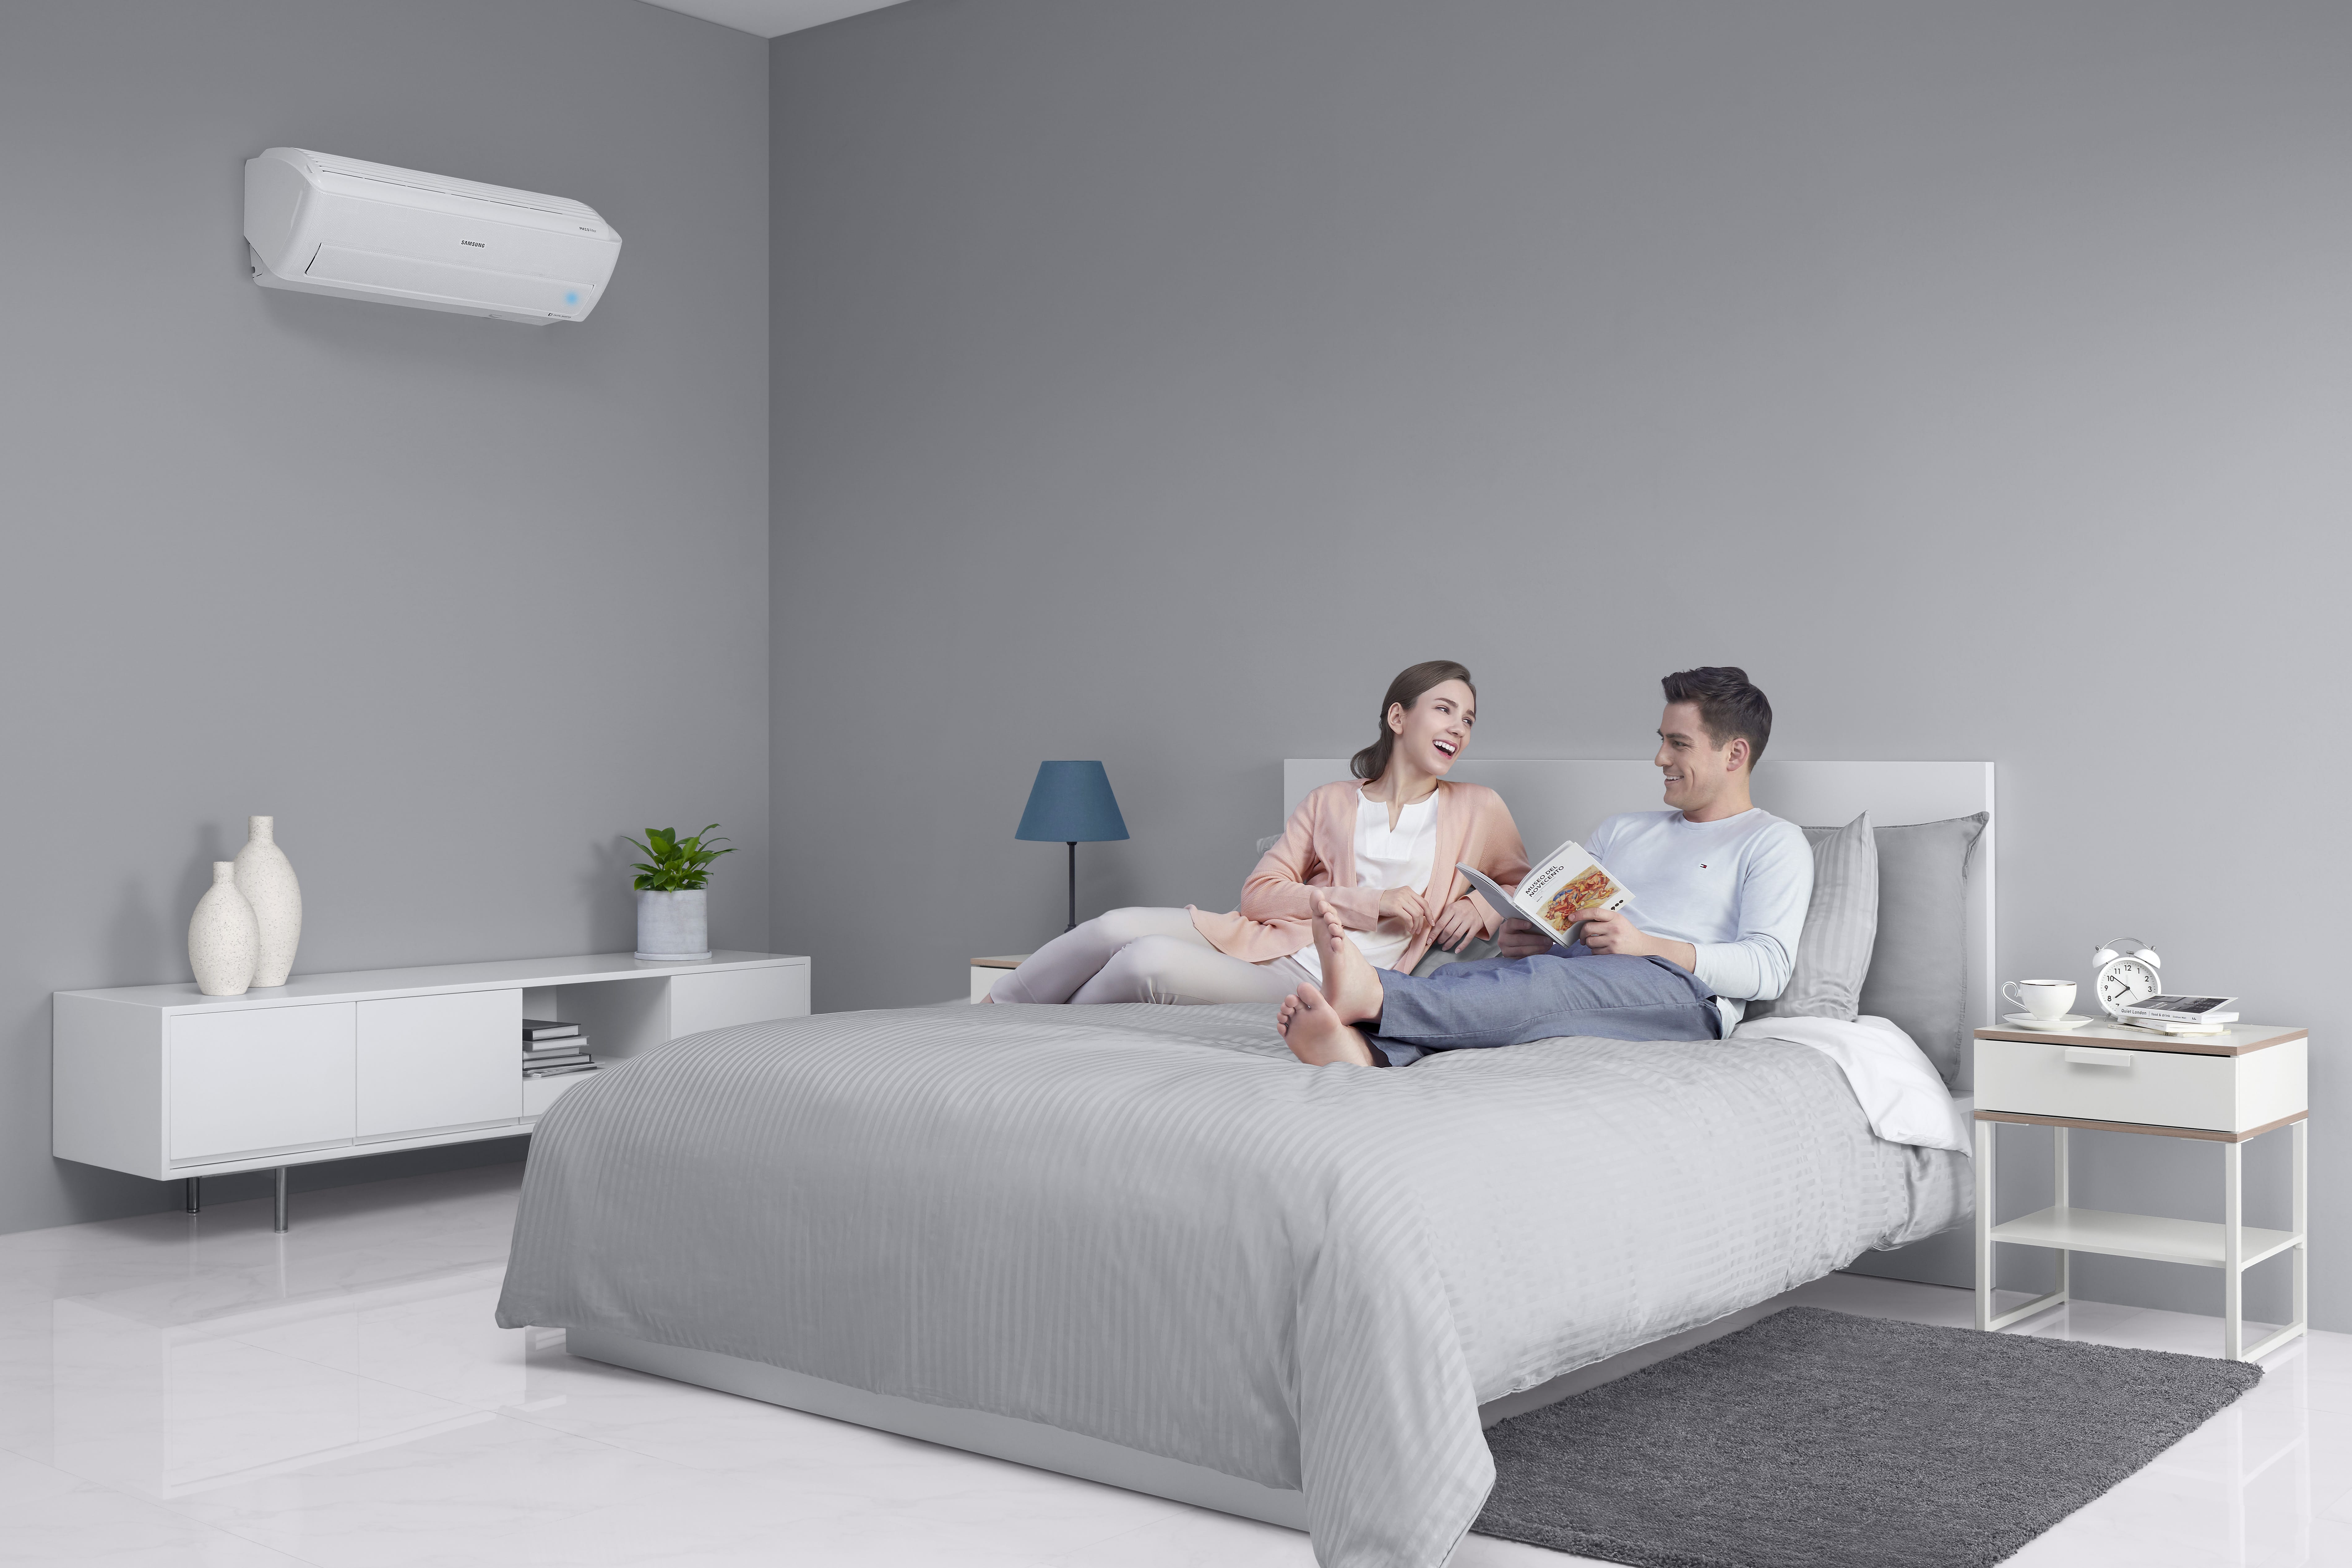 SAMSUNG Digital Appliances make perfect home partners for newlyweds